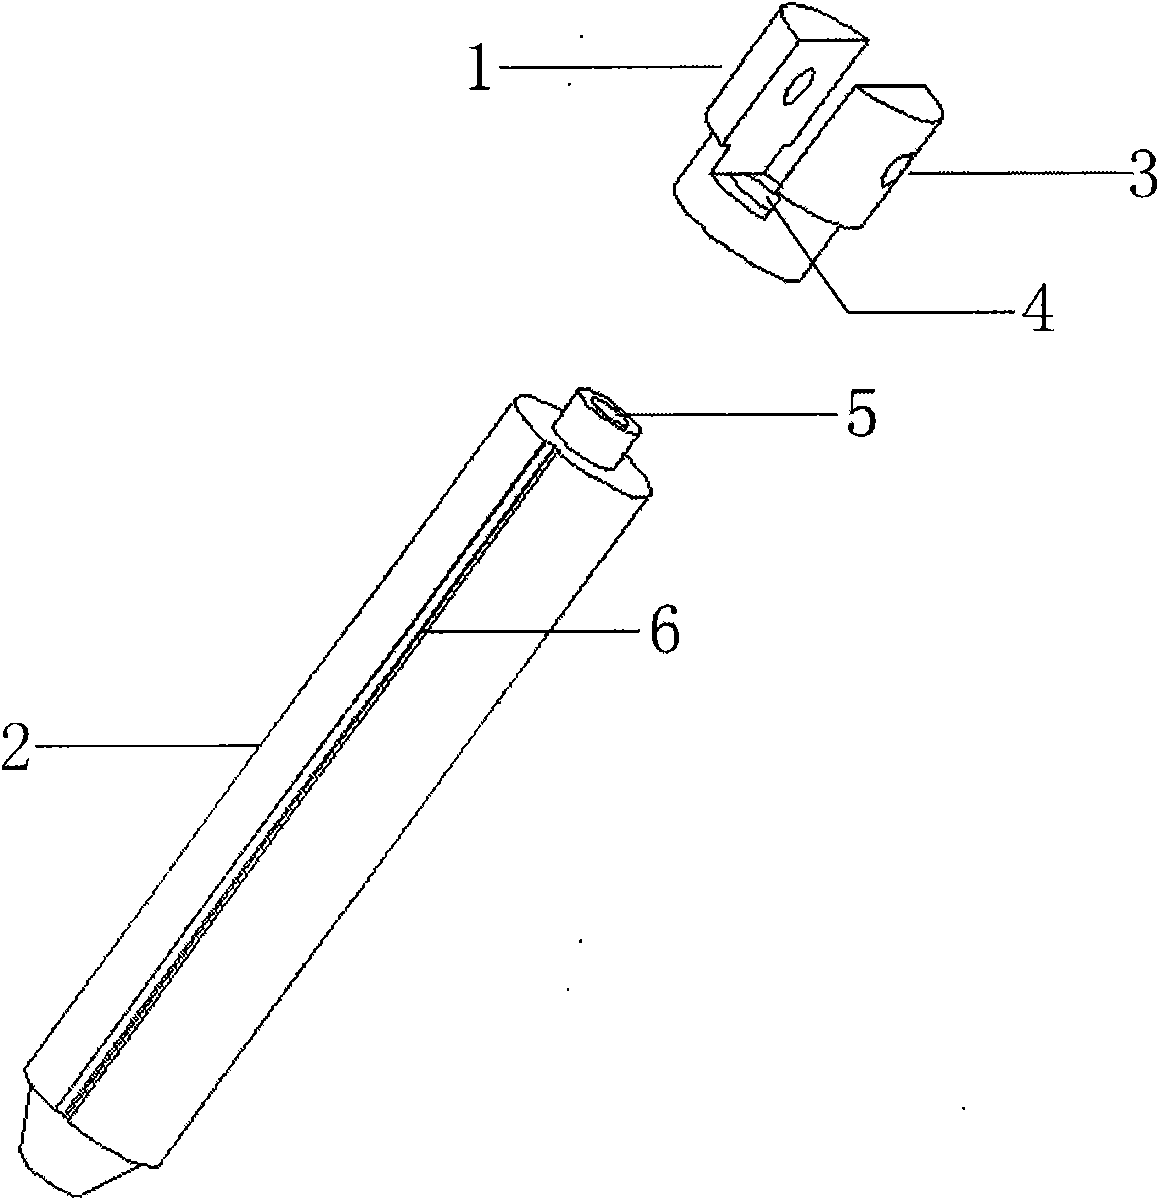 Push rod device for electromagnet